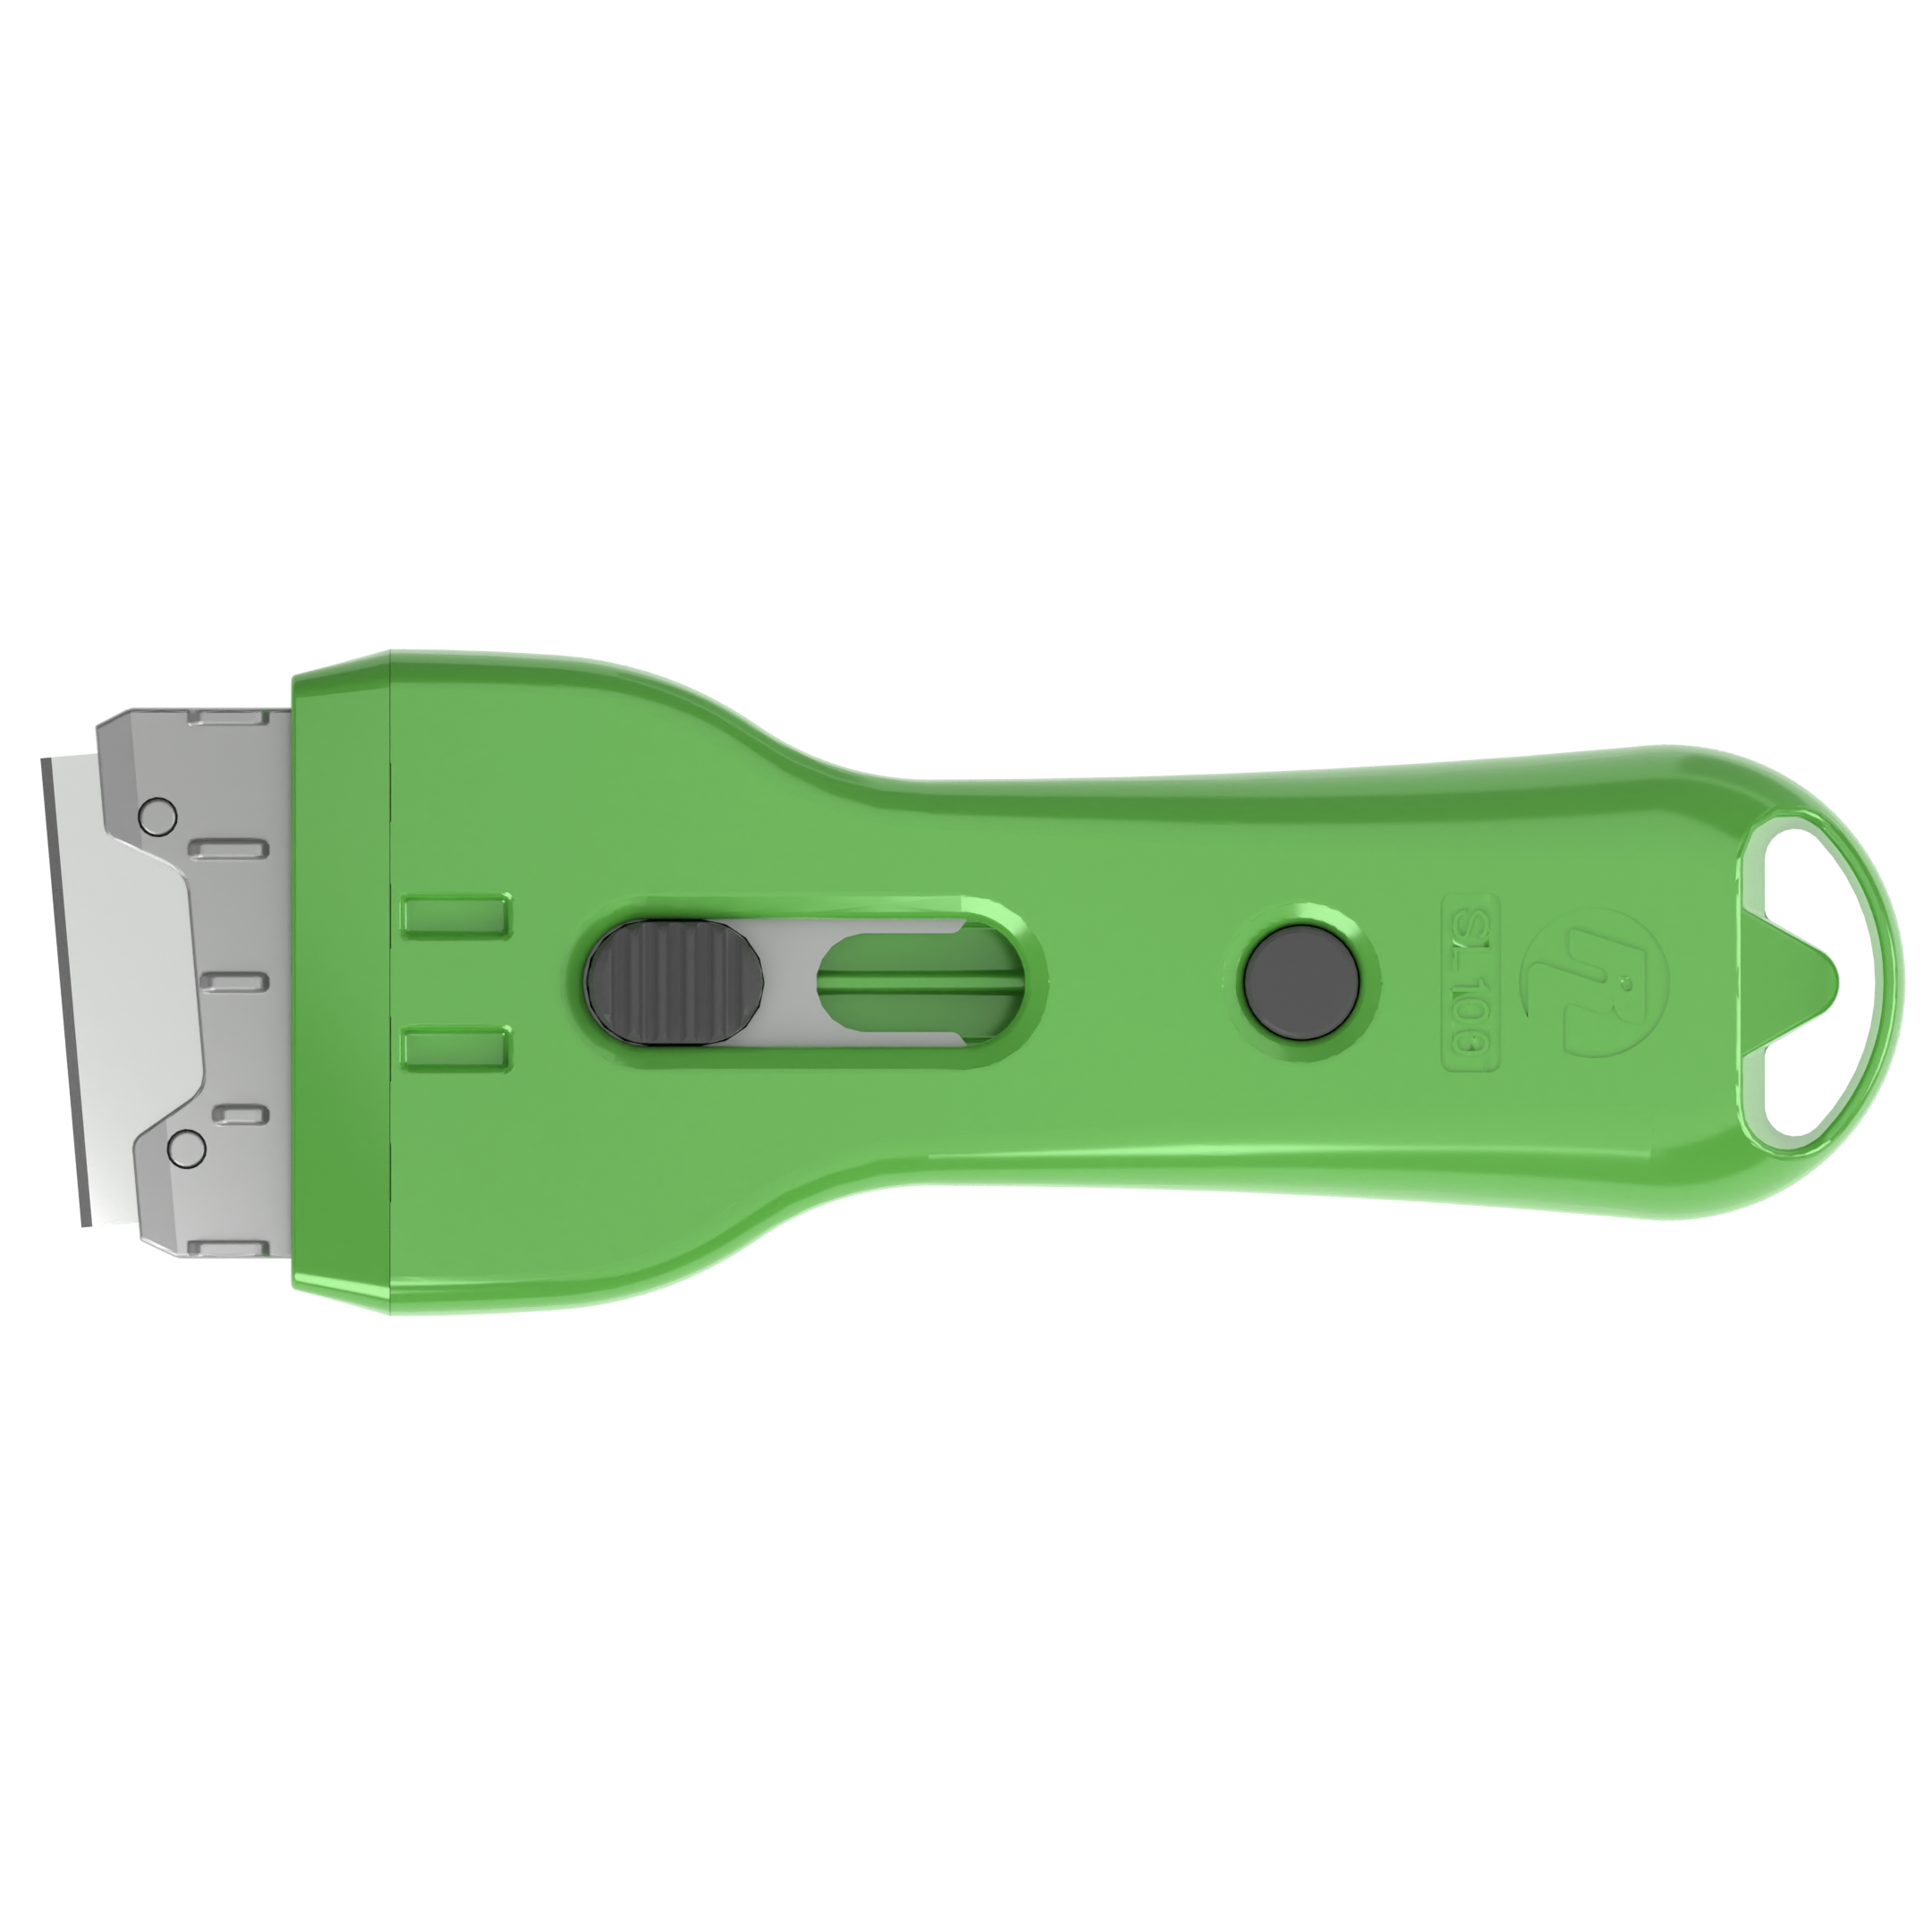 Riteknife AS100 Auto Retractable Safety Knife